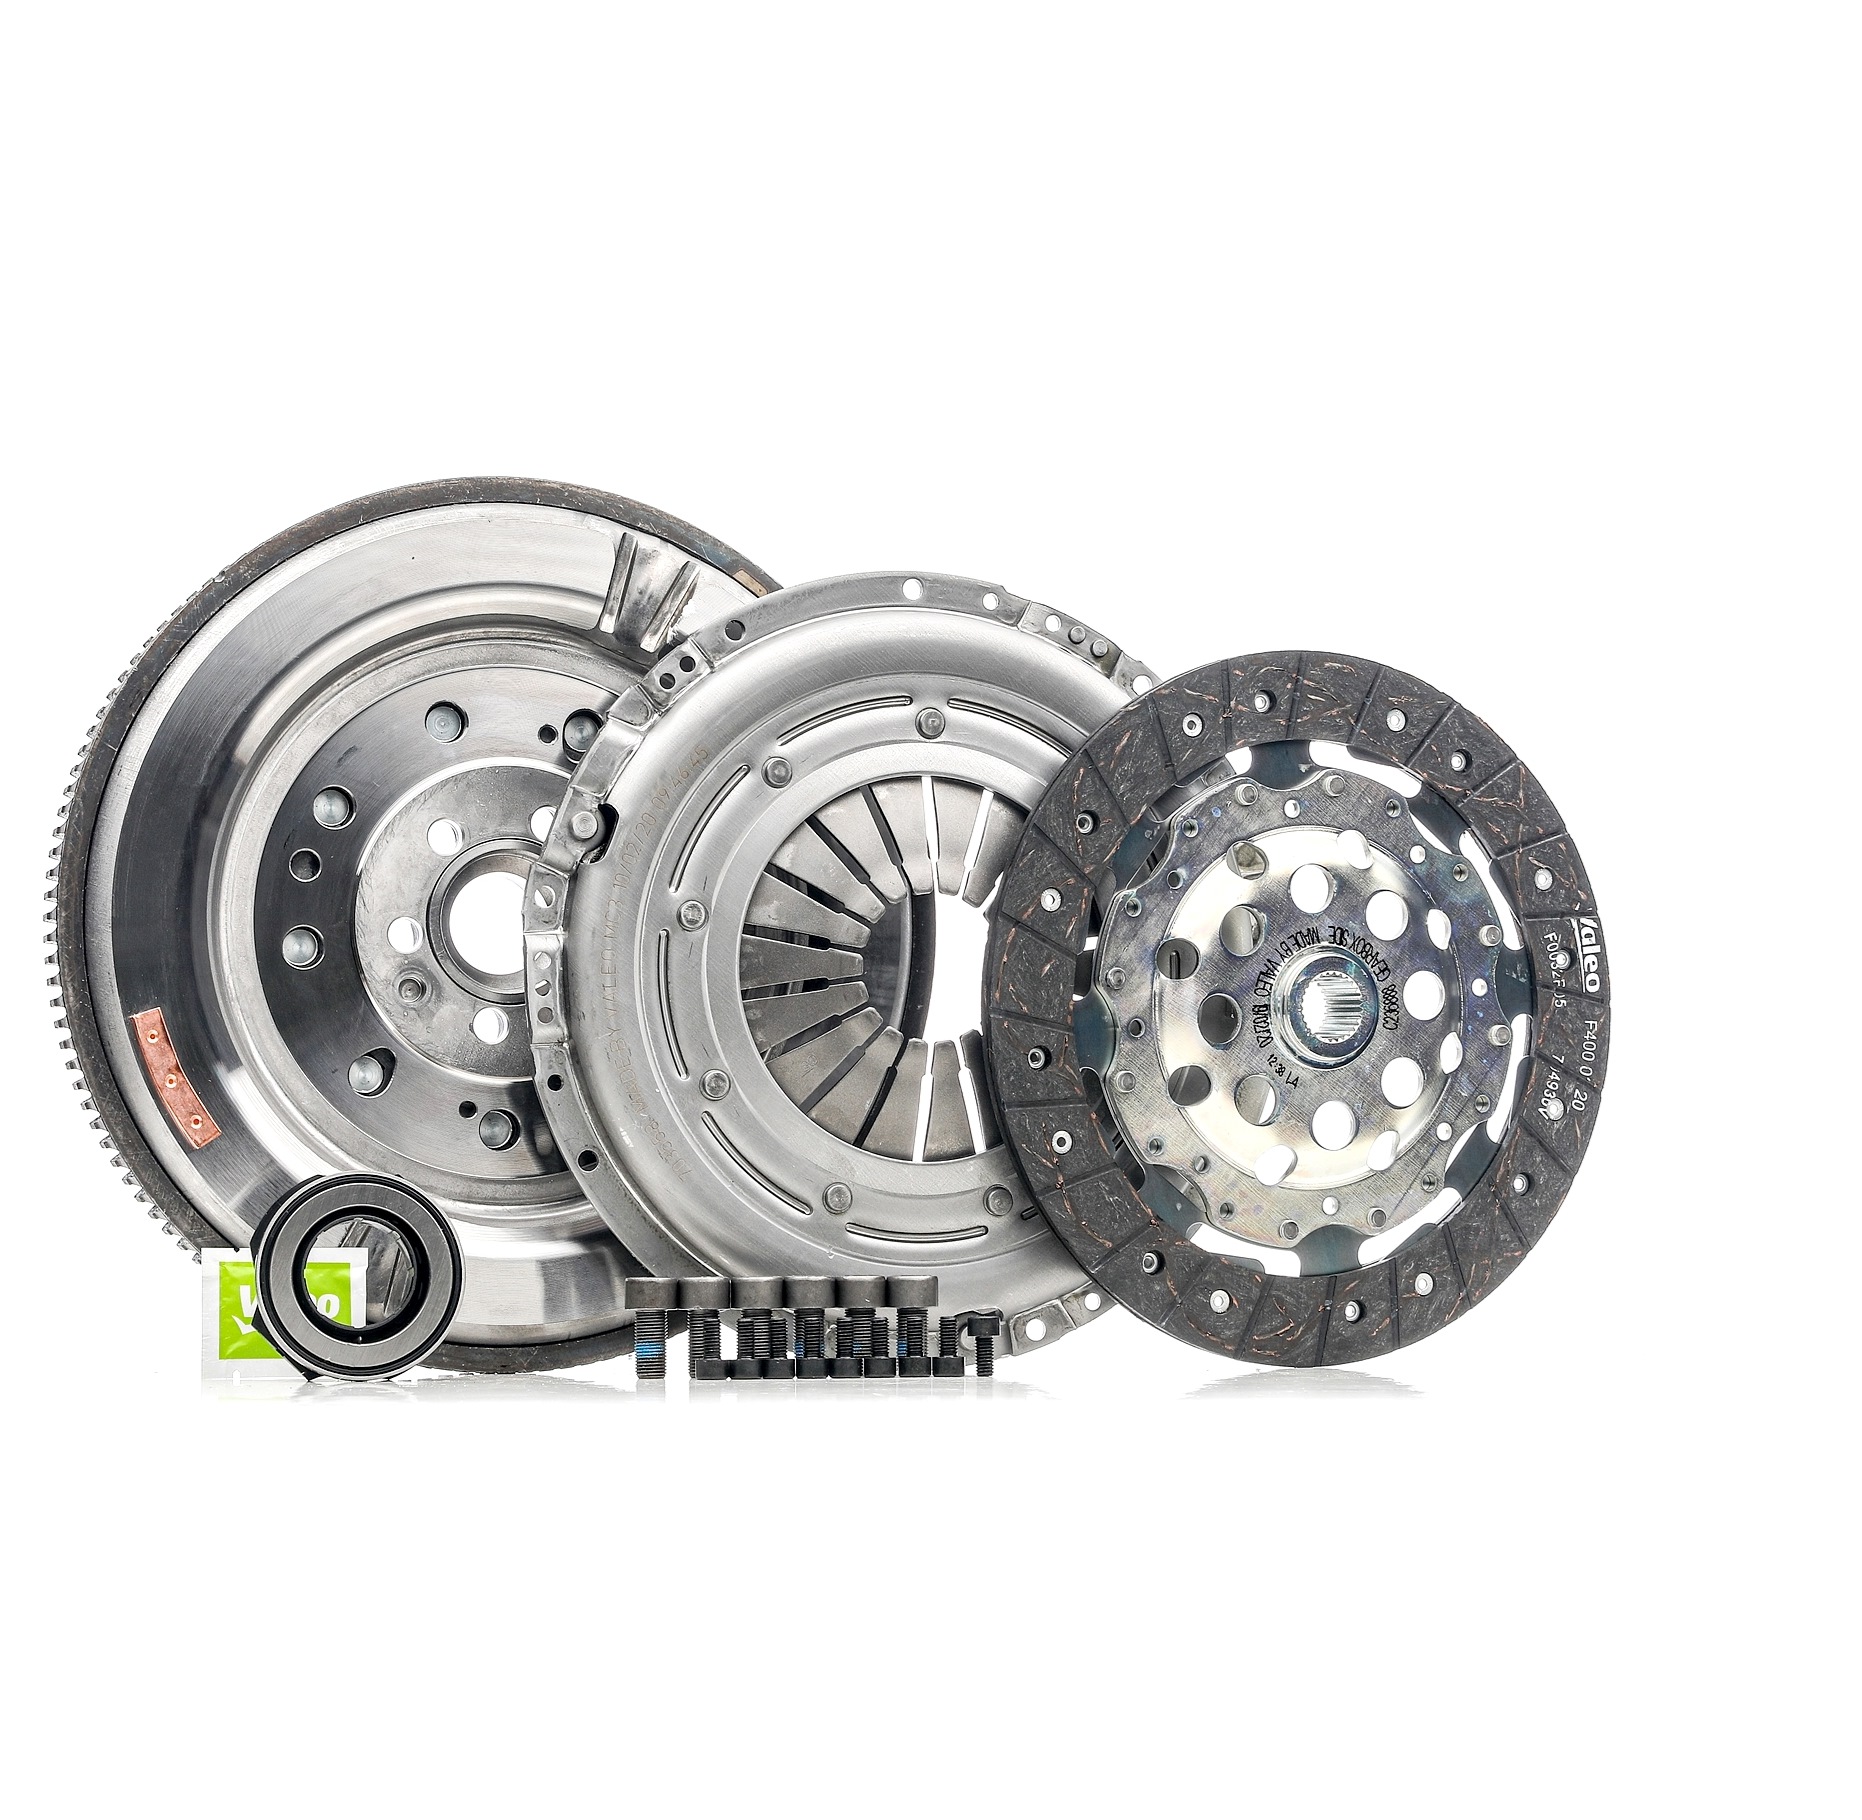 VALEO FULLPACK DMF for engines with dual-mass flywheel, with clutch pressure plate, with flywheel, with screw set, with clutch disc, with clutch release bearing, 229mm Clutch replacement kit 837018 buy